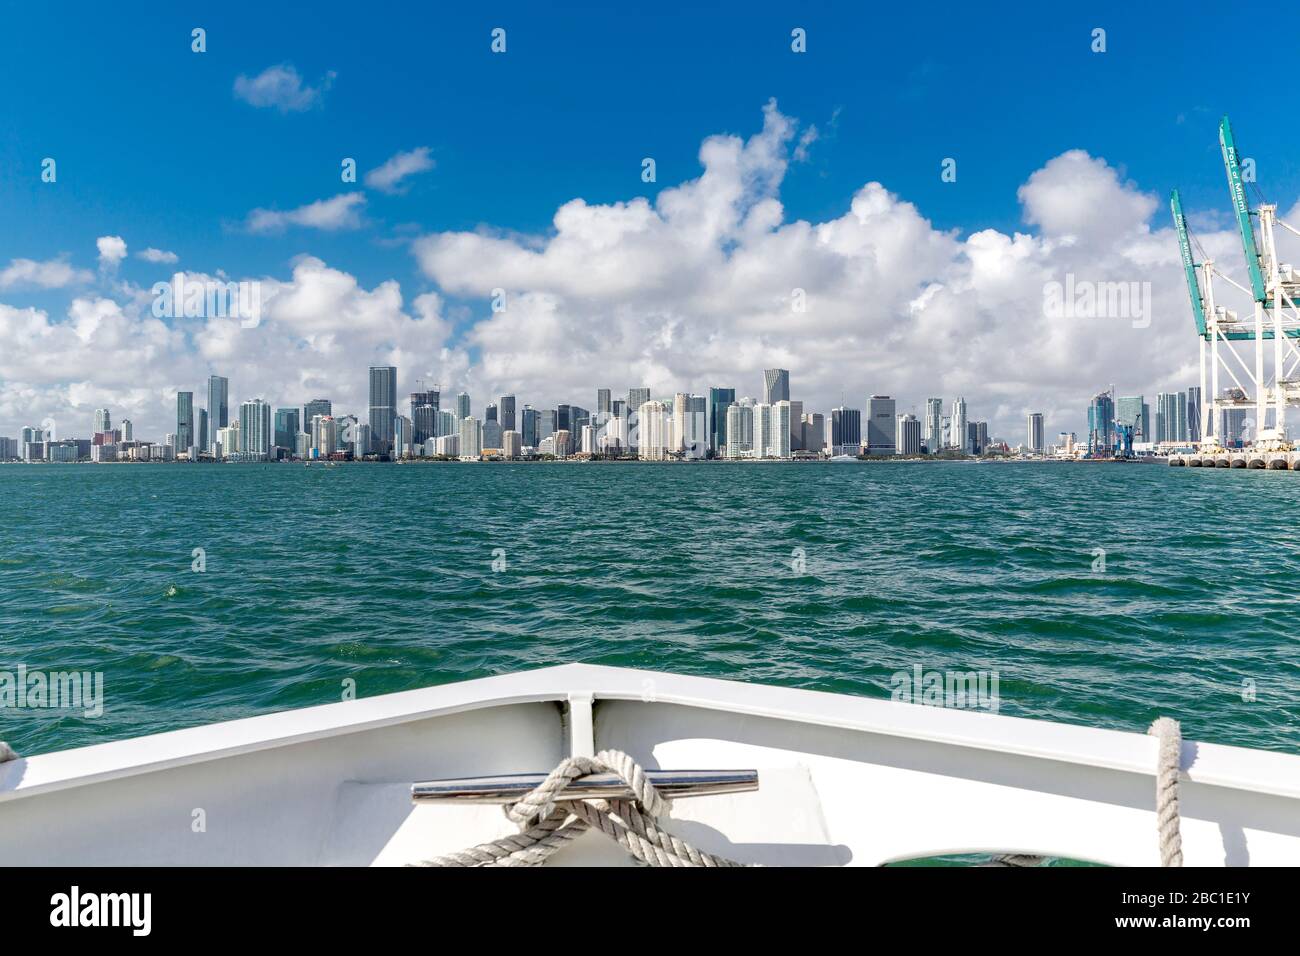 USA, Florida, skyline of Downtown Miami seen from boat on the water Stock Photo